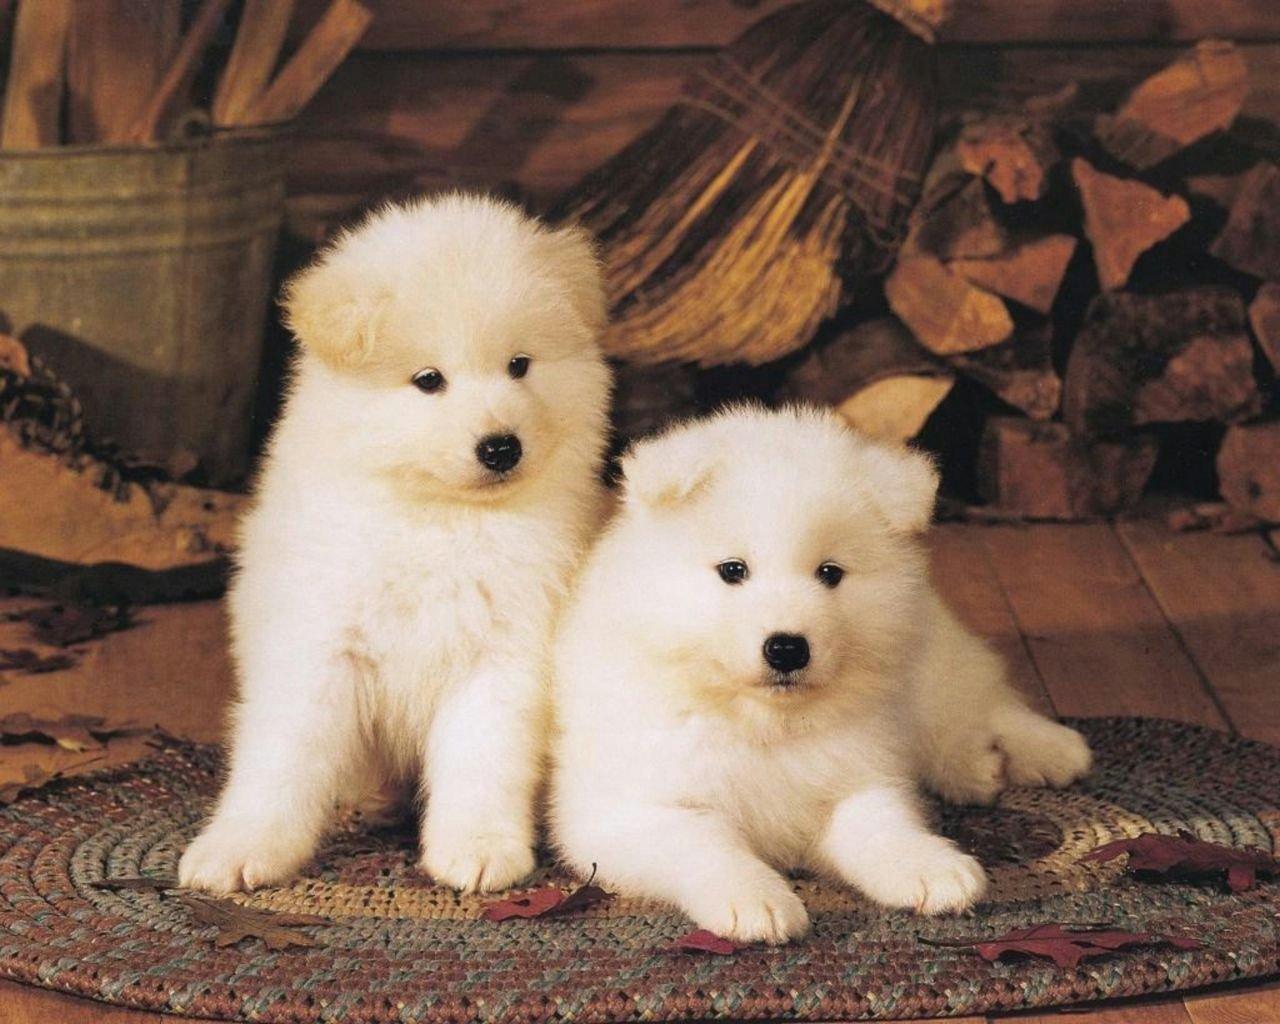 Two white American Akita puppies photo and wallpaper